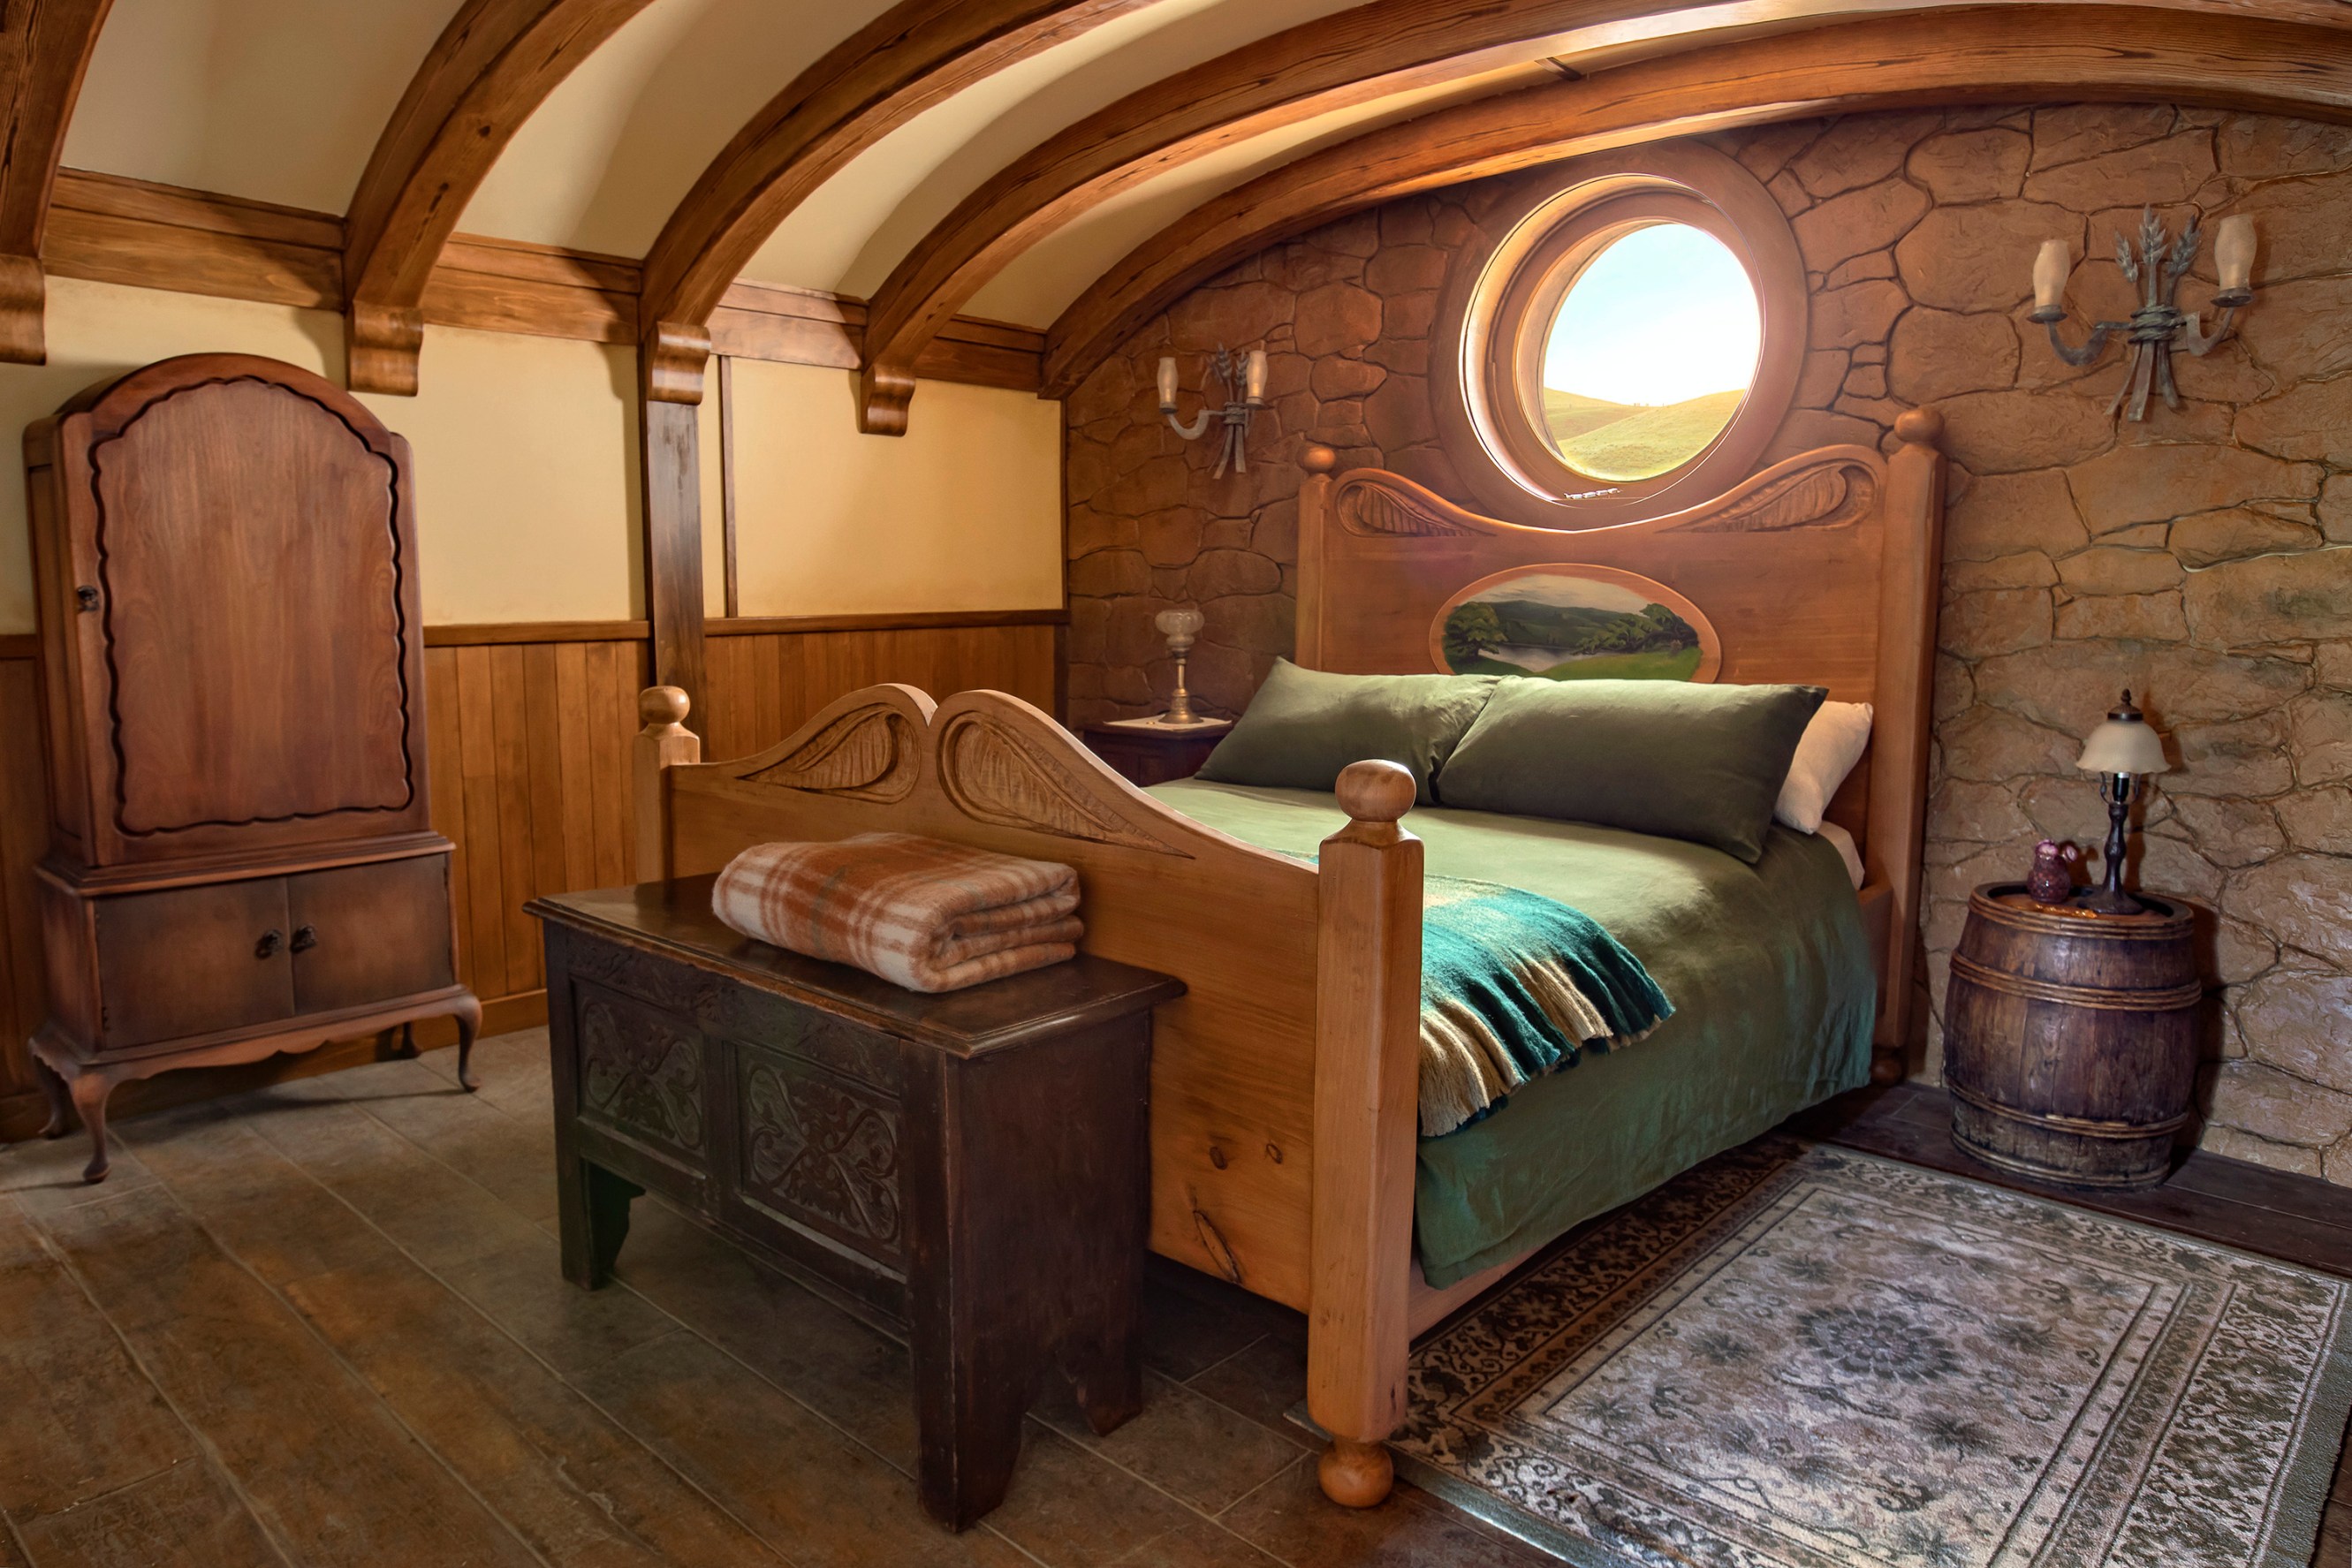 Bedroom view with wood floors, a wooden chest closet and a large wooden bed with green pillows and blankets. A small oriental rug lays alongside the bed and a wooden storage bench is at the end of the bed. A small porthole window is above the bed's headboard.